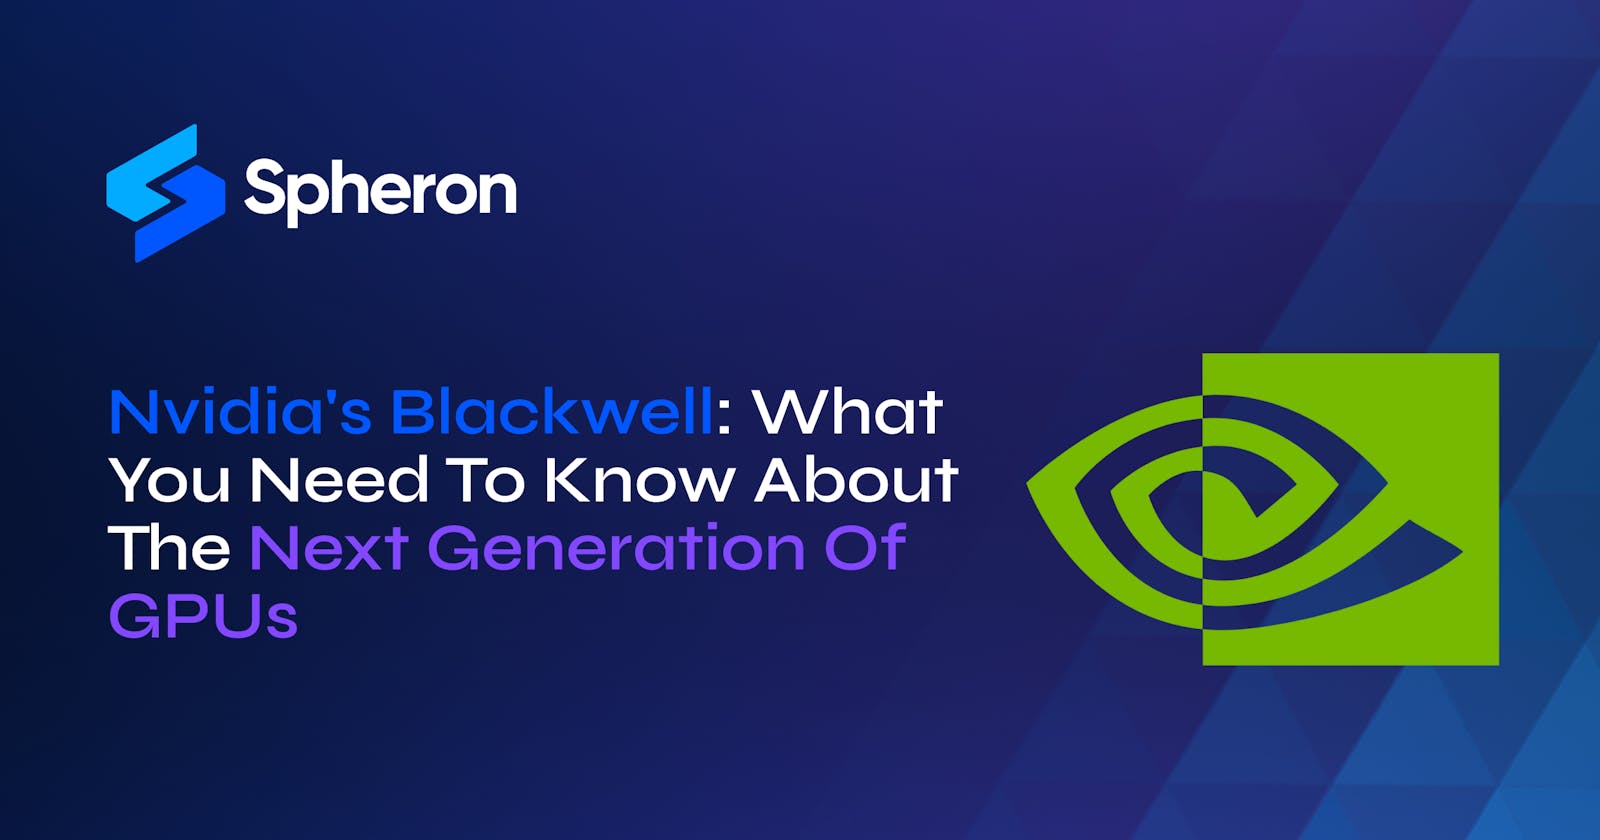 Nvidia's Blackwell: What You Need To Know About The Next Generation Of GPUs